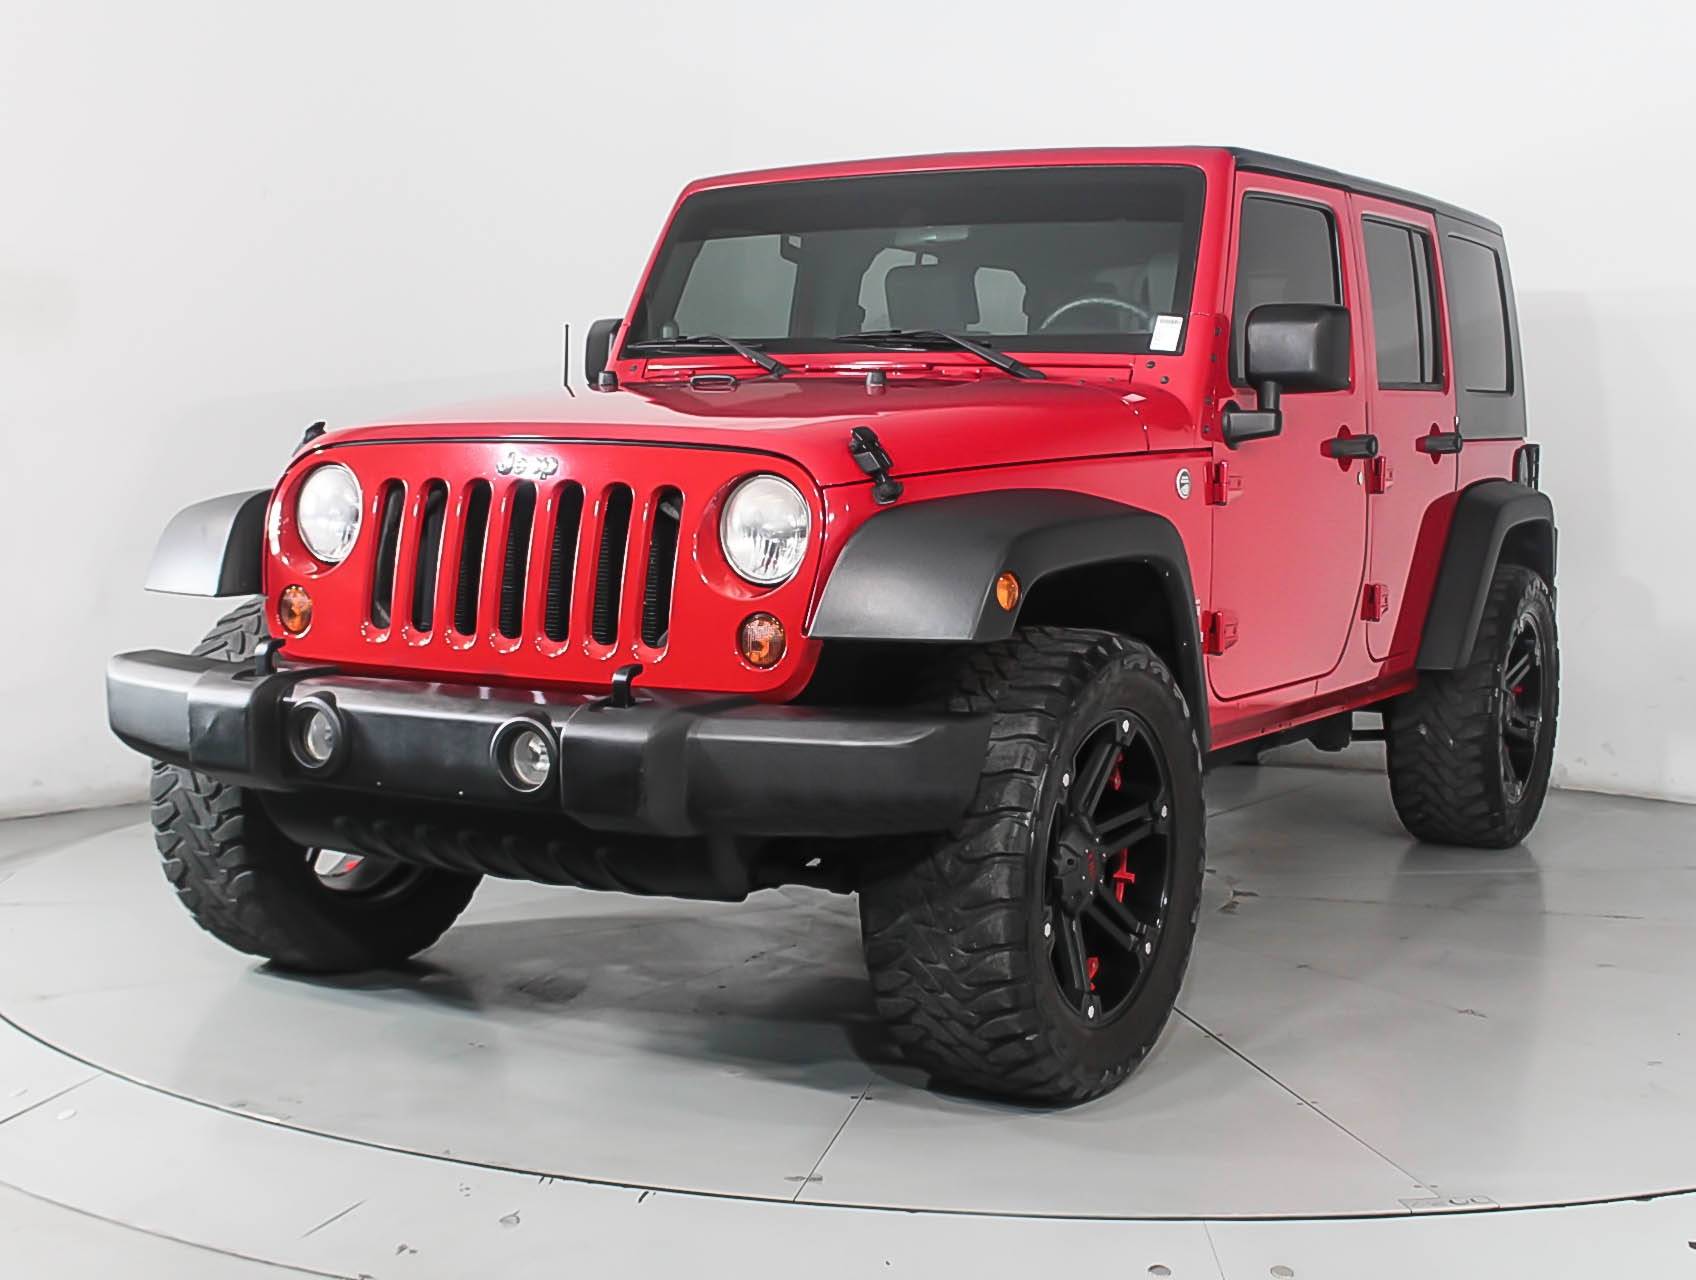 Used 2010 JEEP WRANGLER UNLIMITED SPORT for sale in MIAMI | 101995